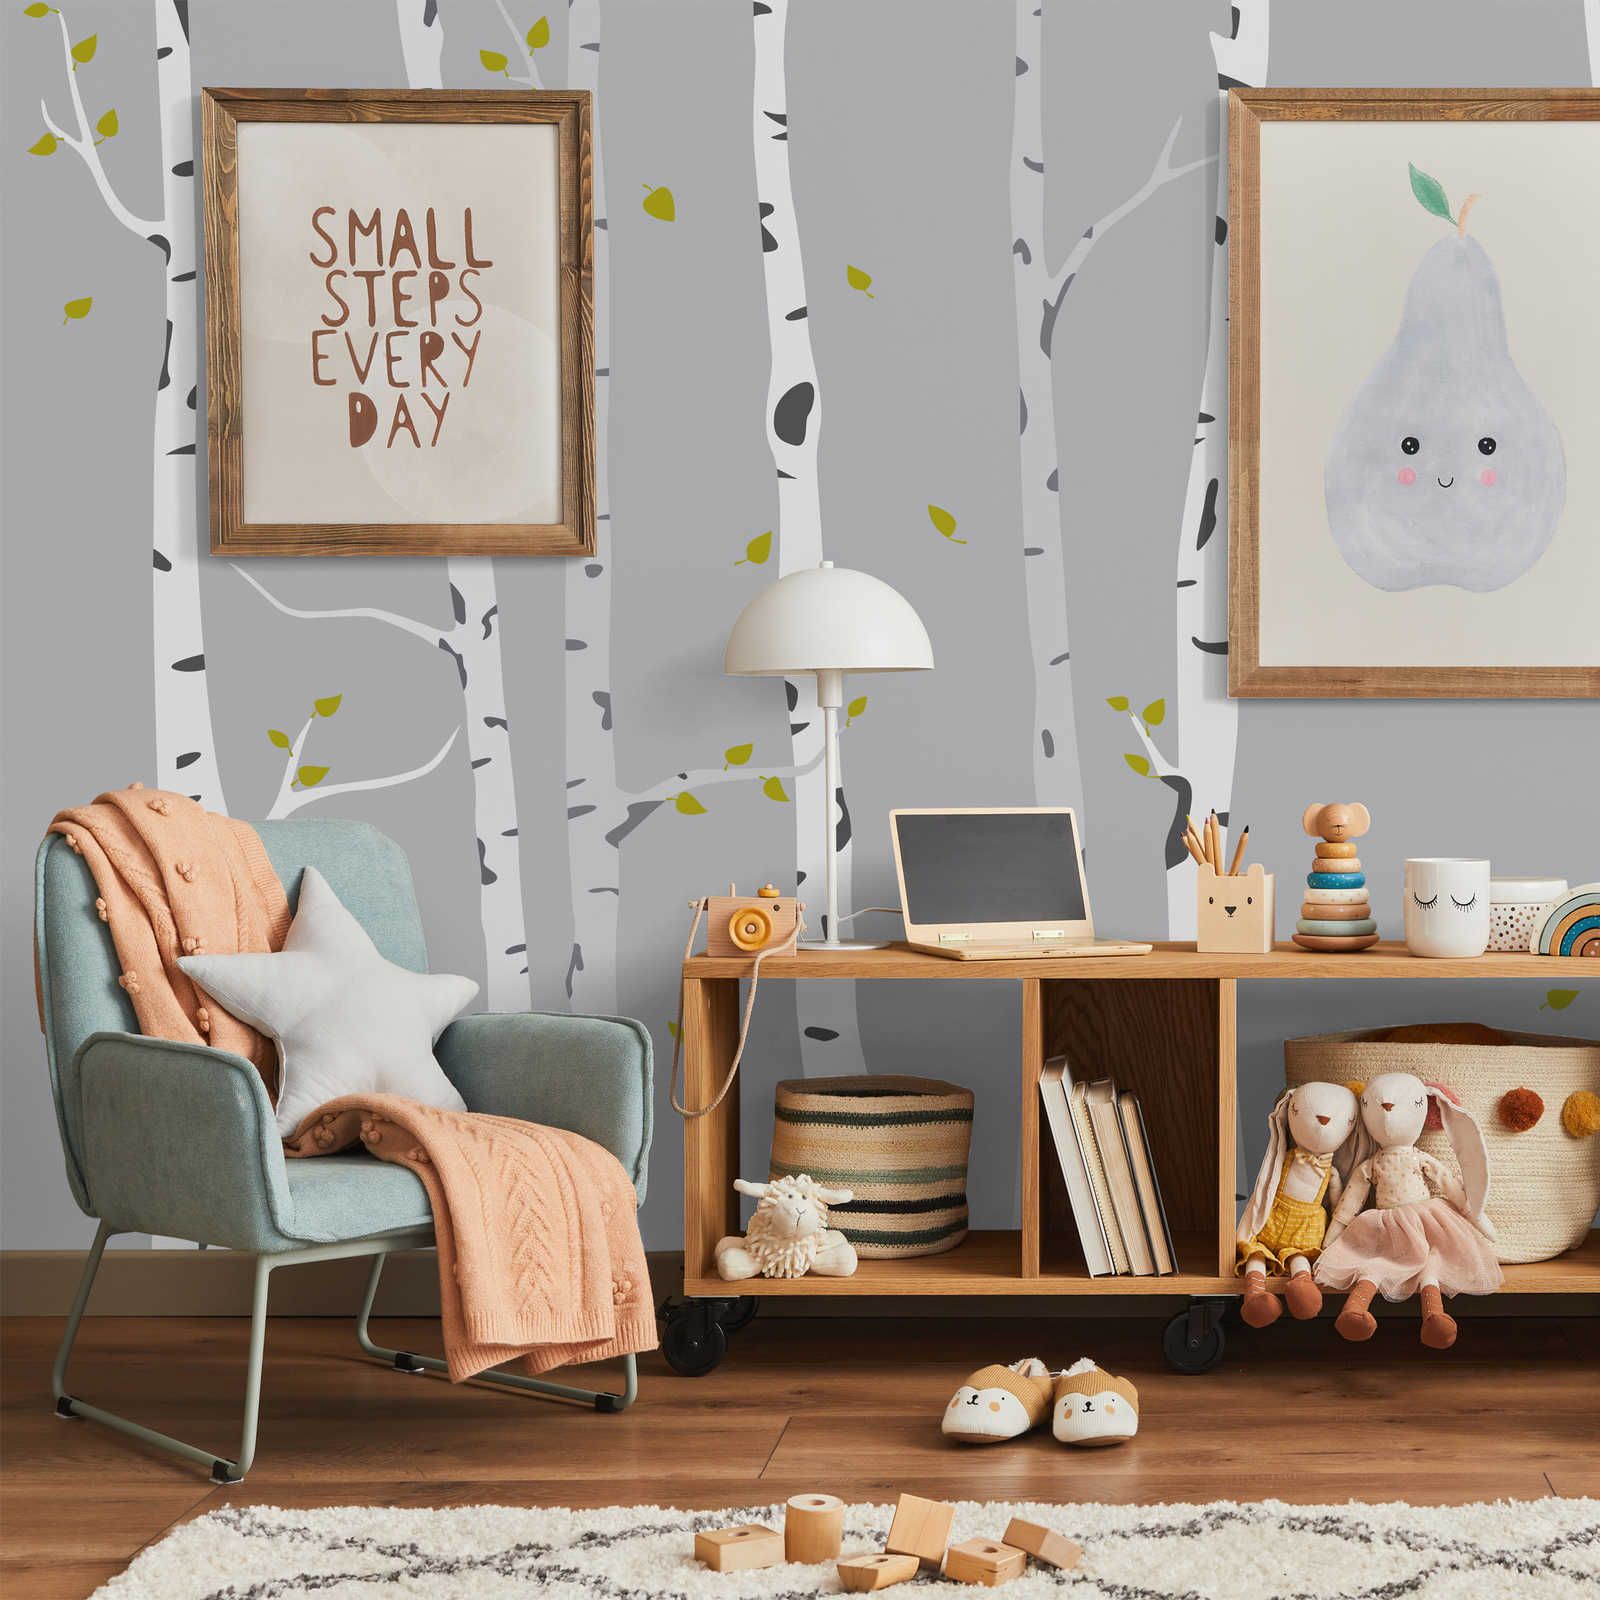 Photo wallpaper with painted birch forest for children's room - textured non-woven
